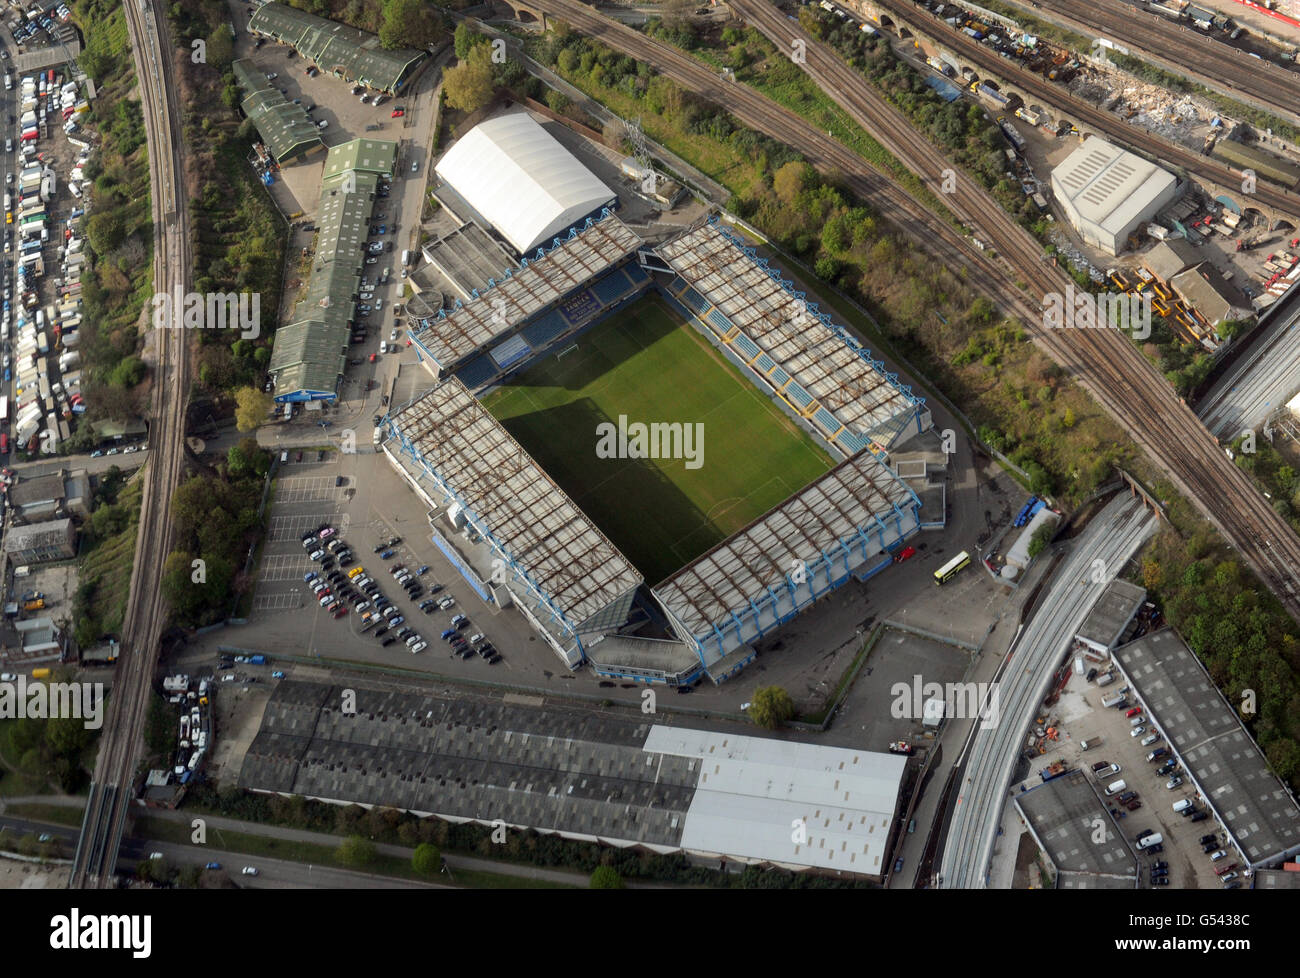 Aerial view of Millwall Football Clubs training ground, Looking